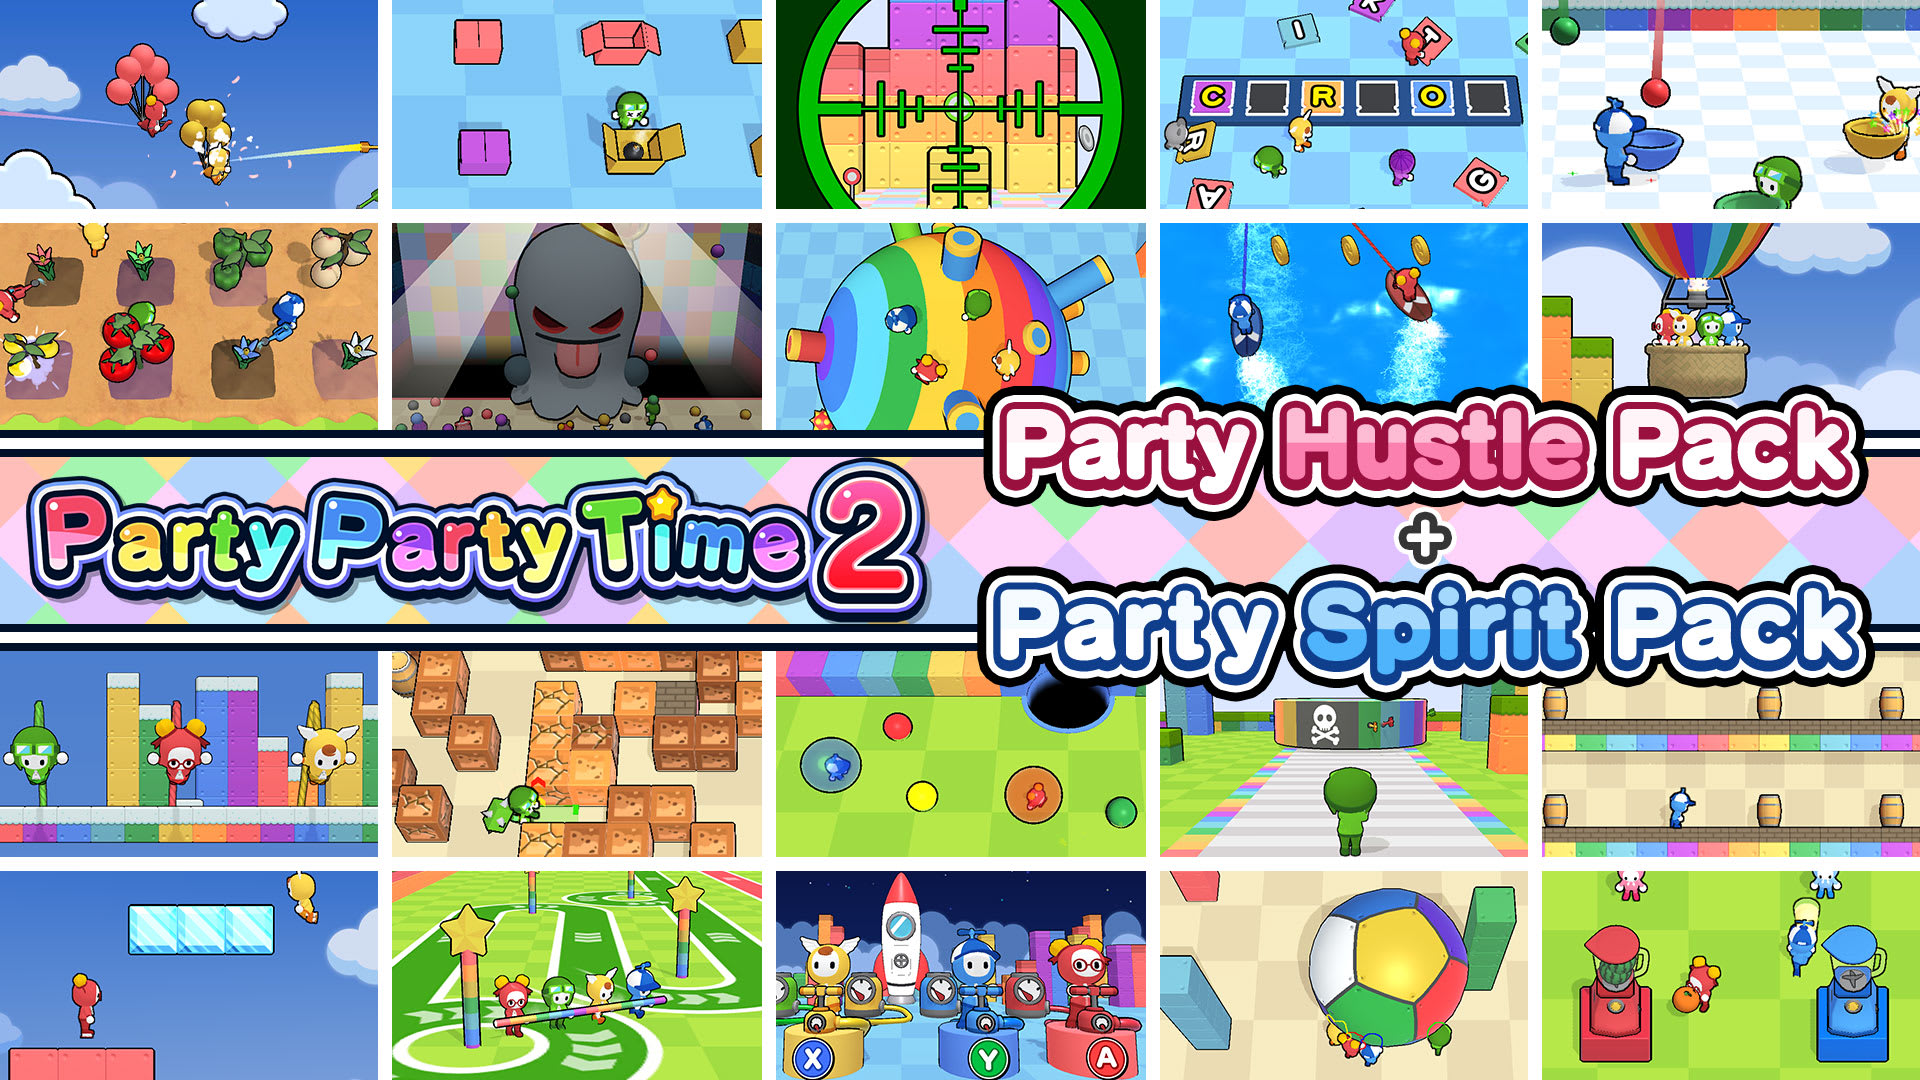 Party Hustle Pack + Party Spirit Pack